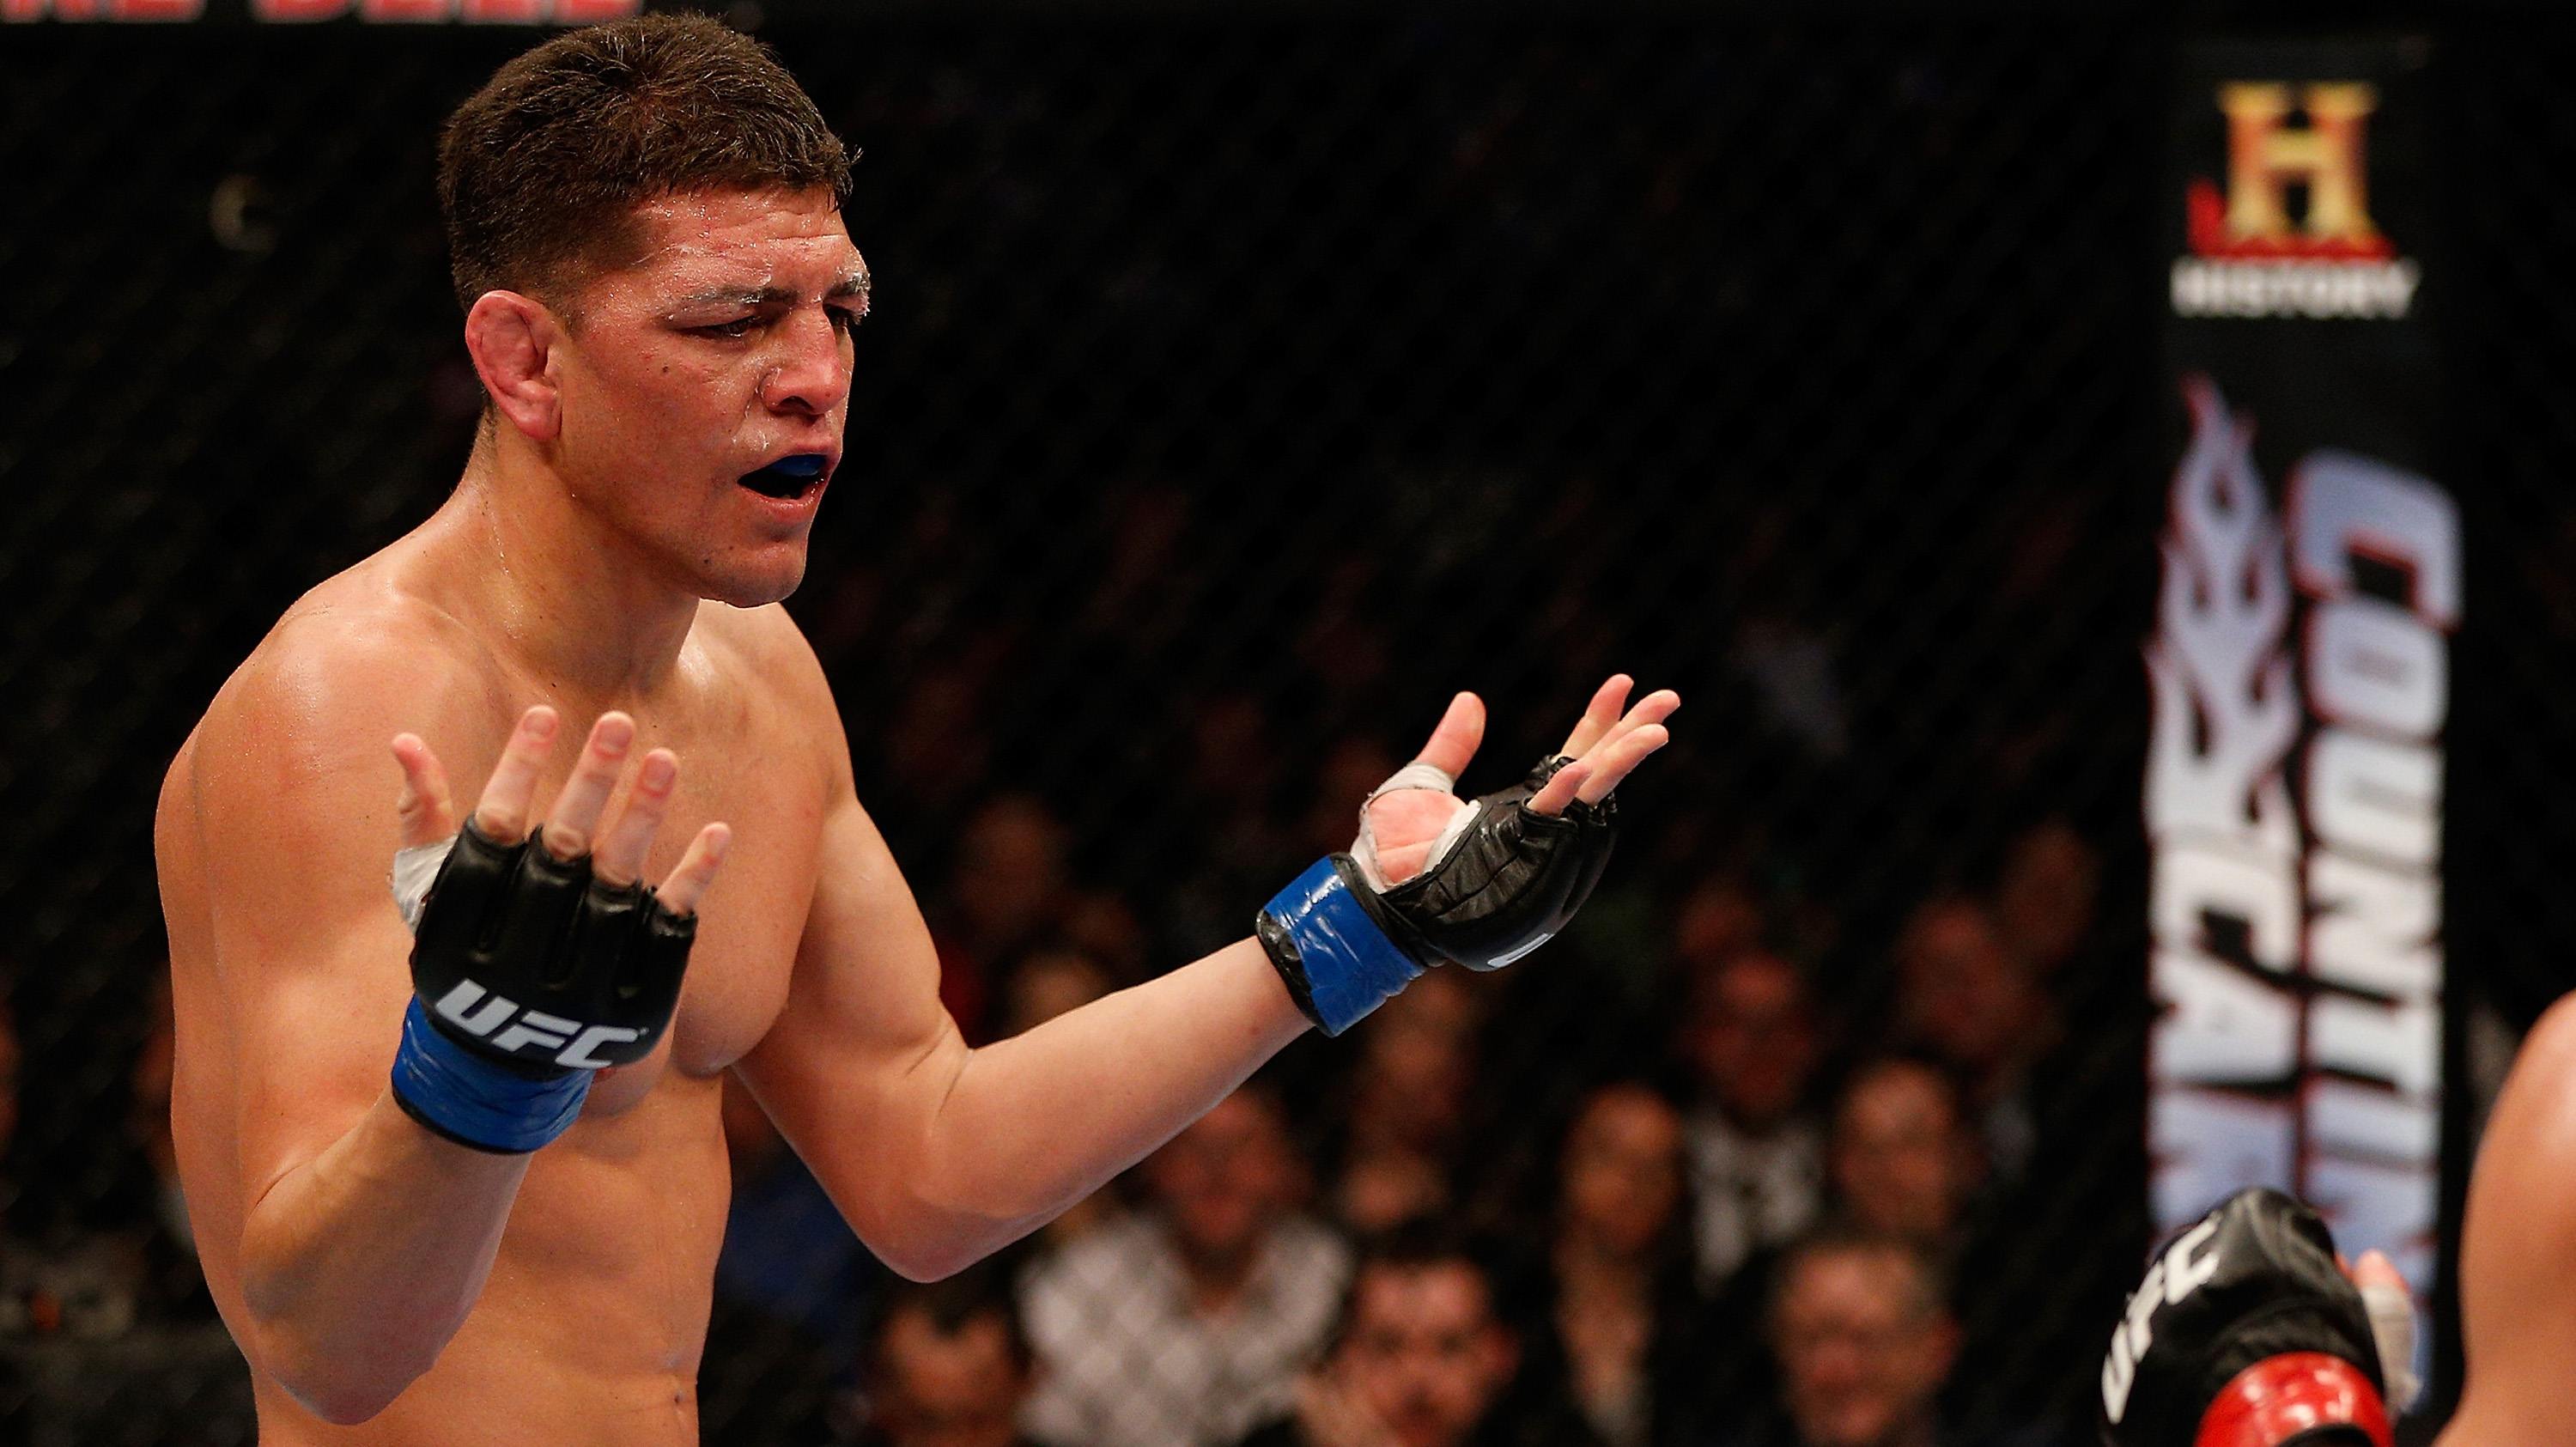 Nick Diaz charges dropped